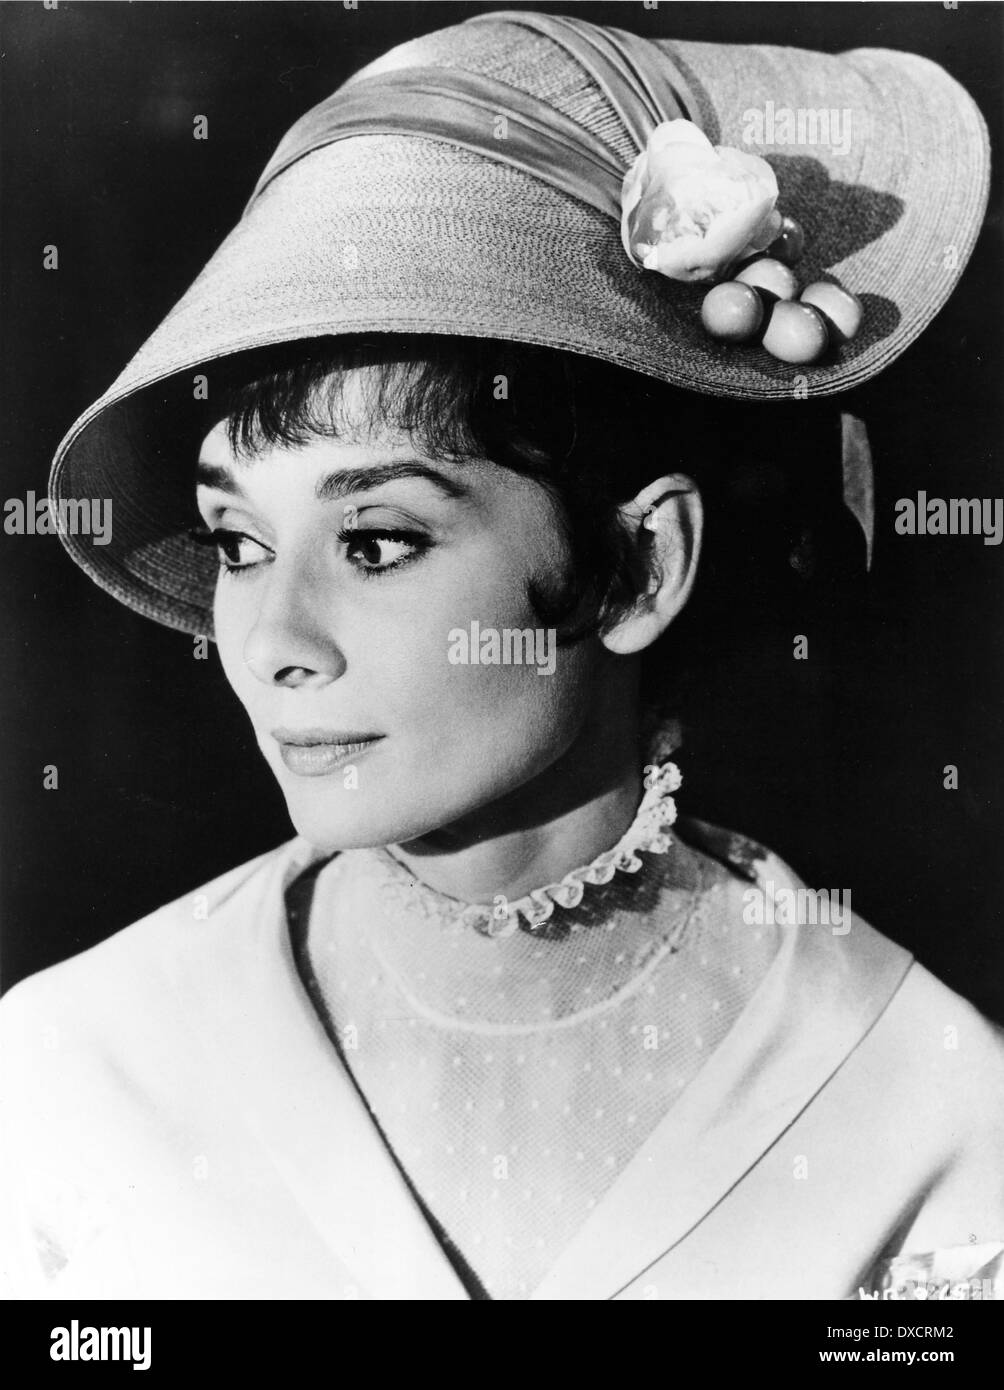 October 21, 1964: “My Fair Lady” Premiered in New York City - Lifetime